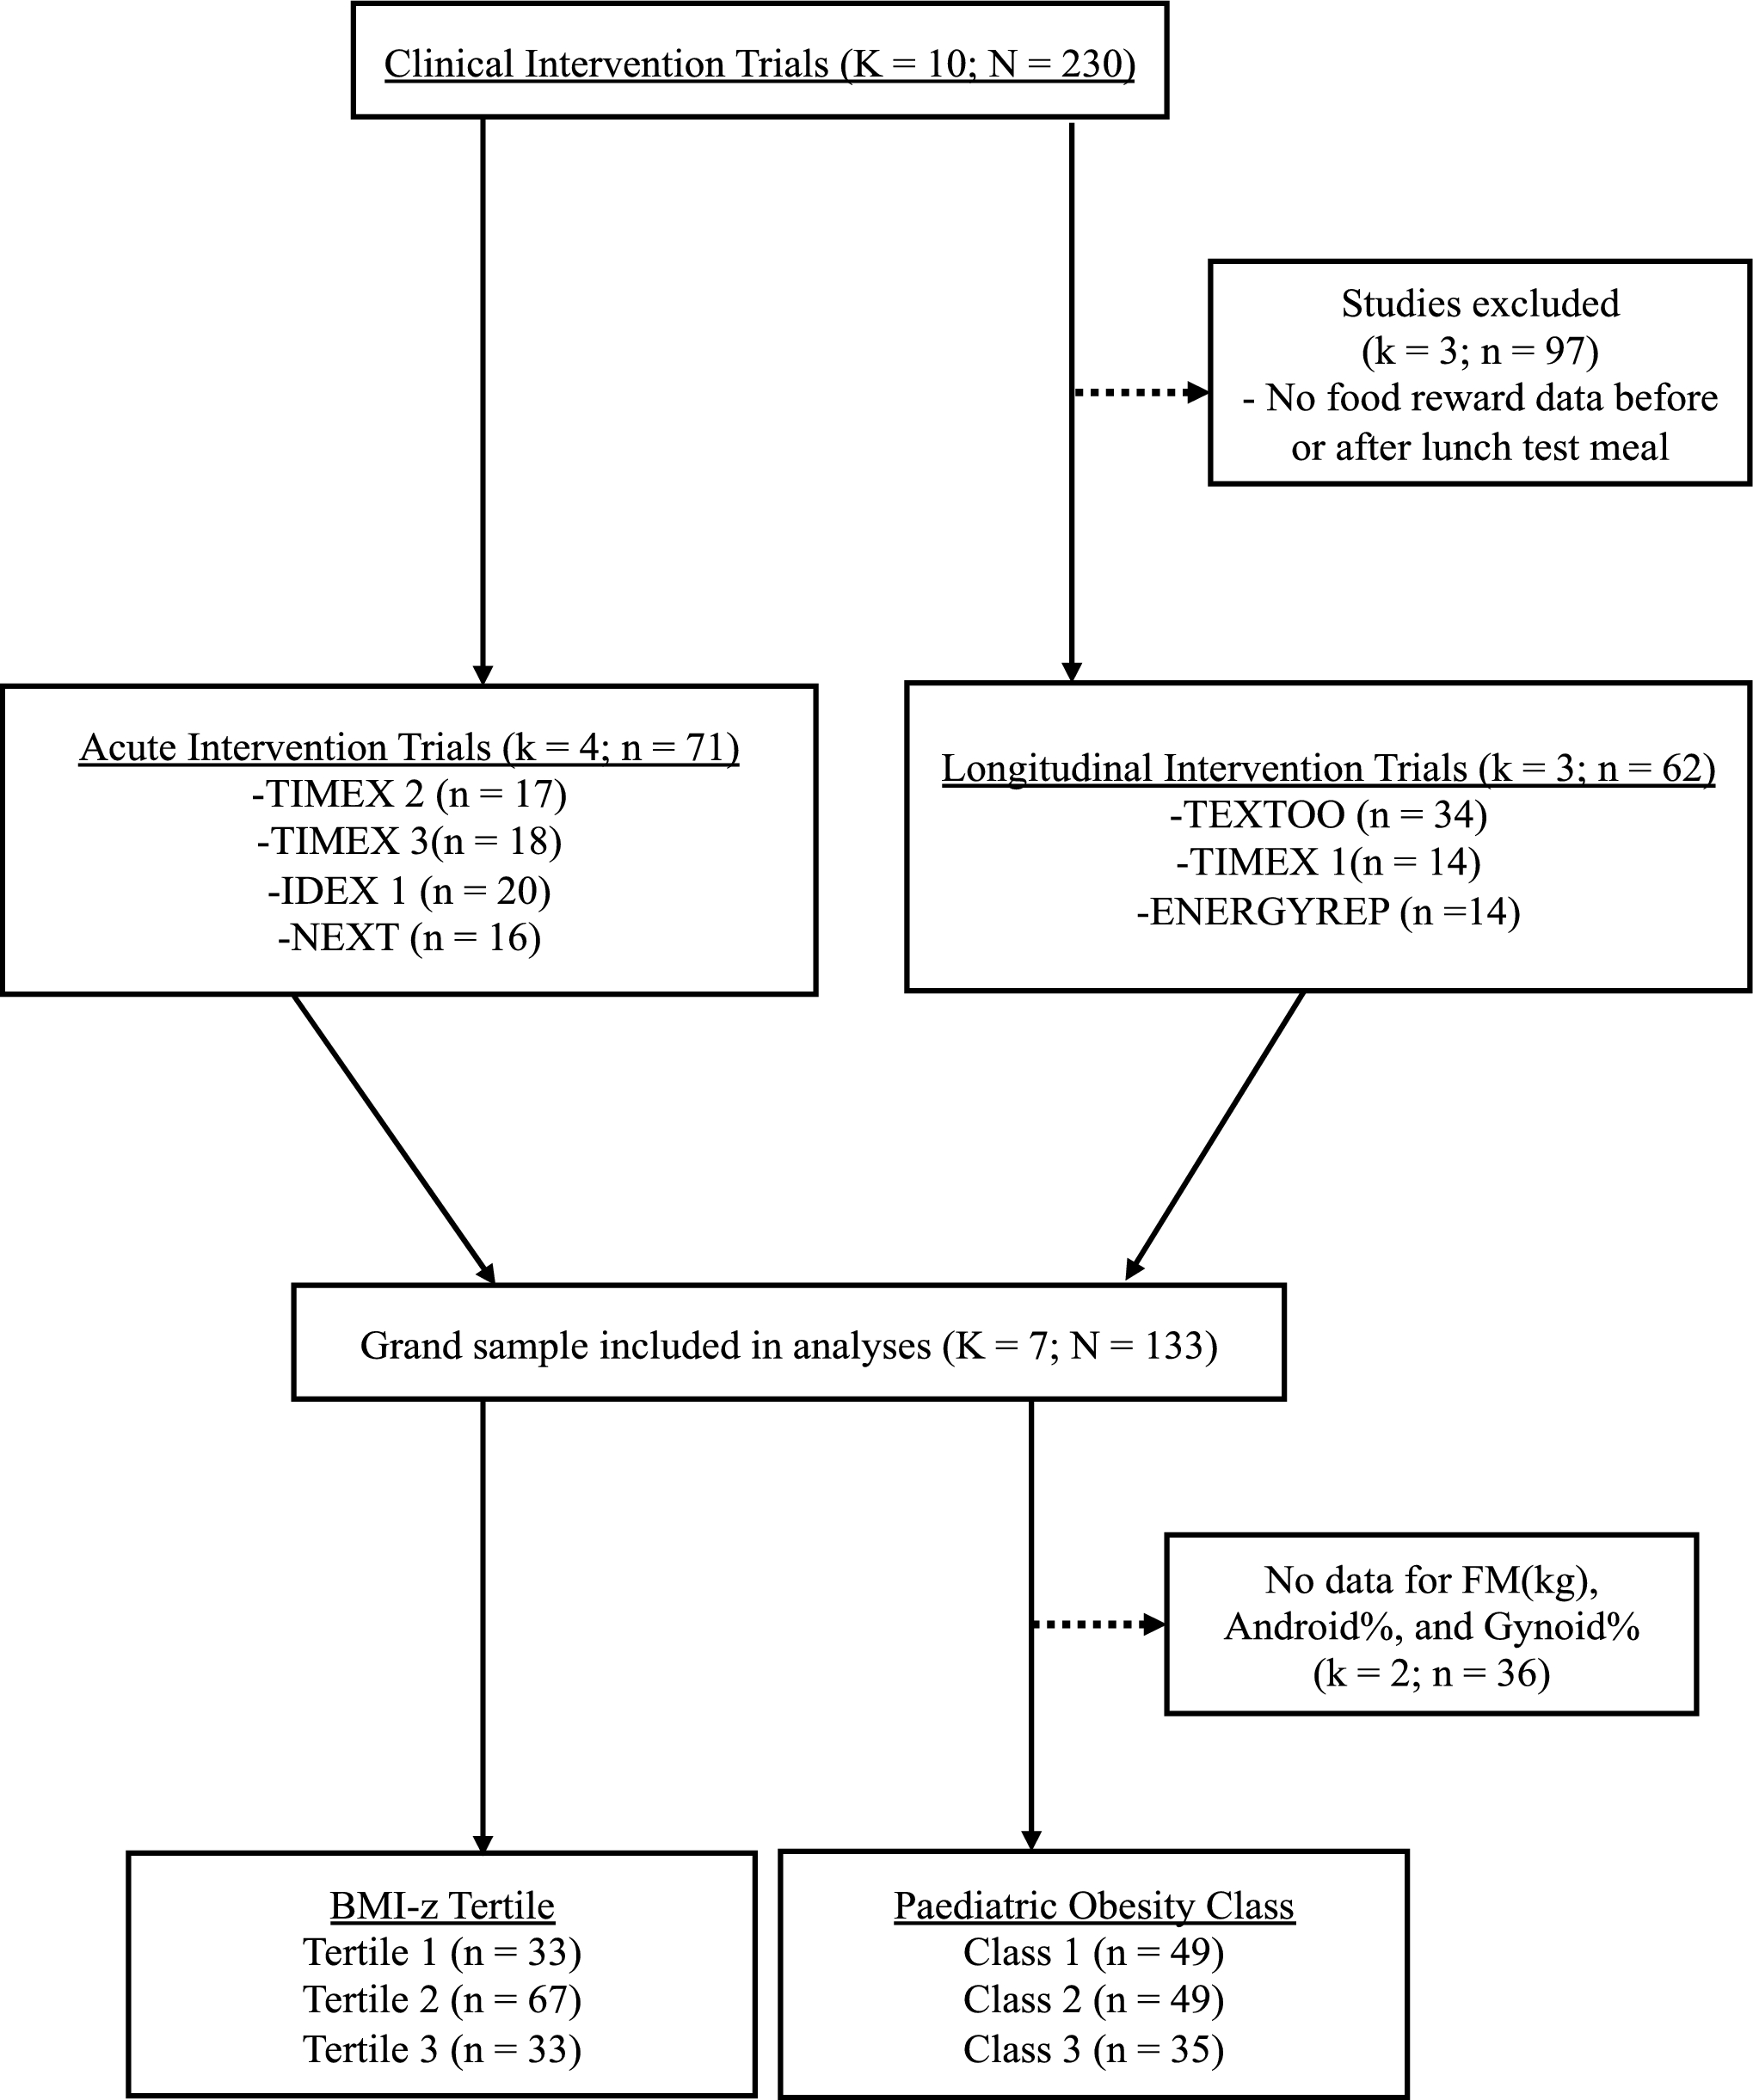 The association between obesity severity and food reward in adolescents with obesity: a one-stage individual participant data meta-analysis